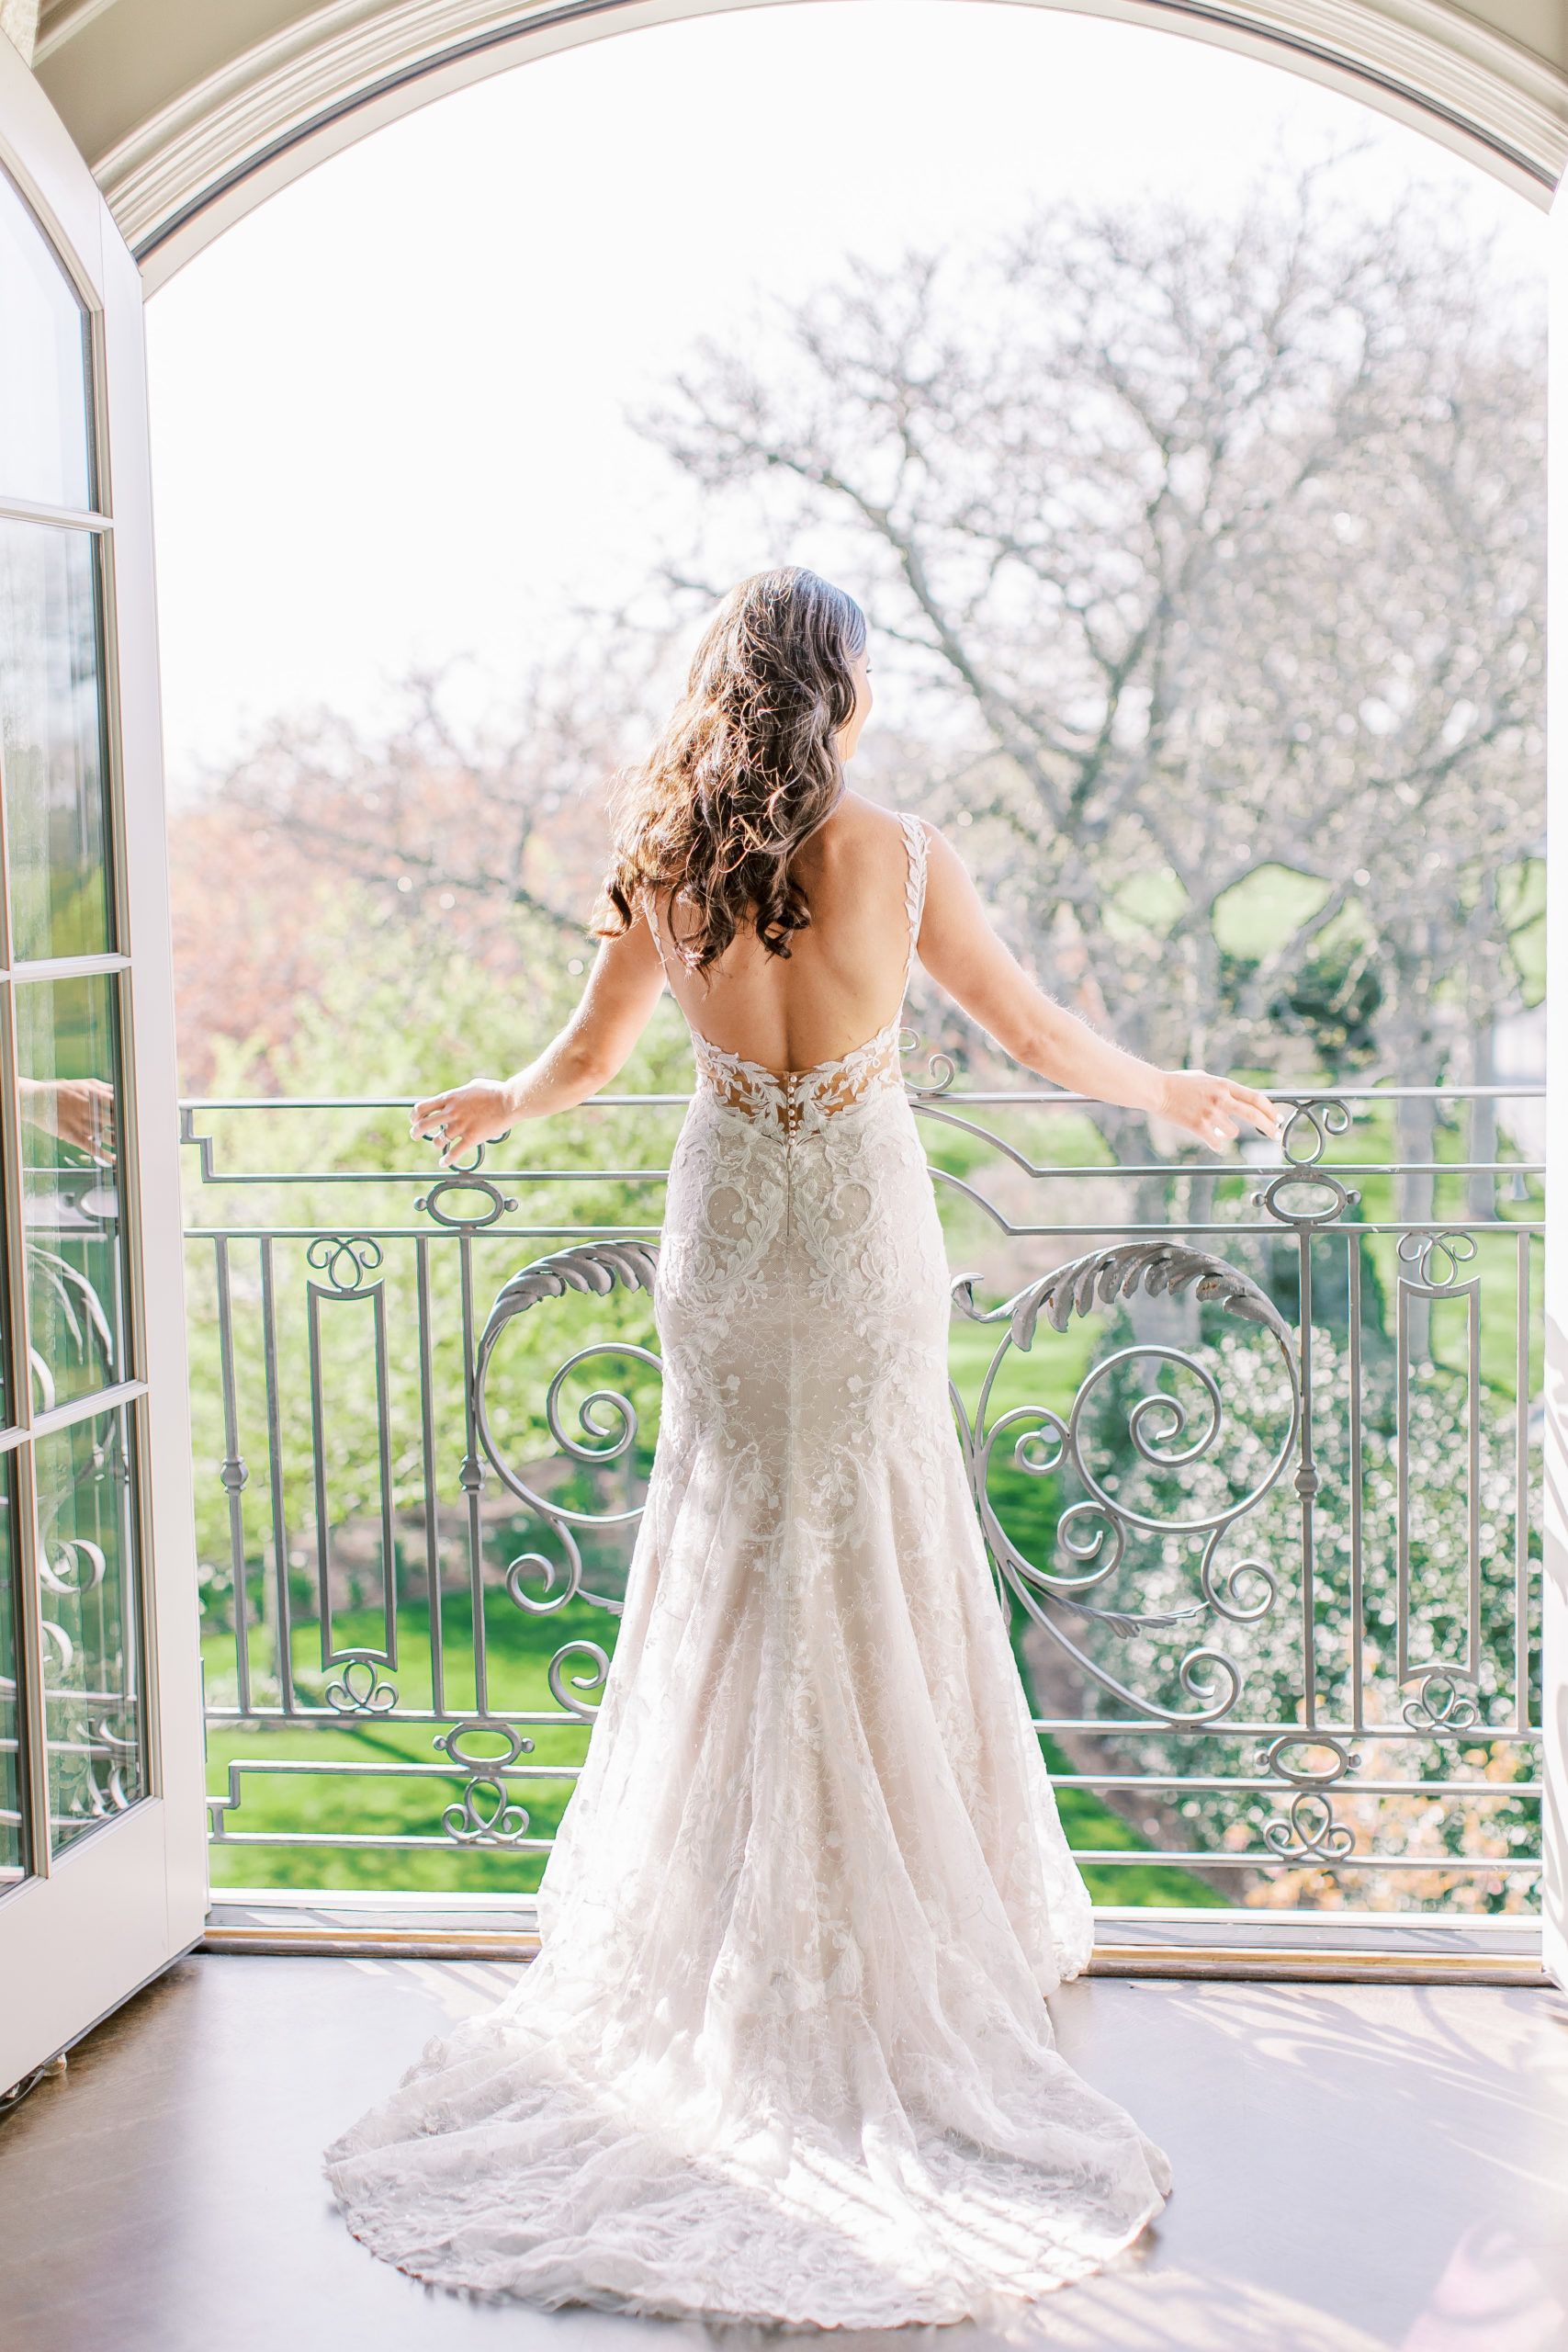 Bride looking out on balcony with wedding dress flowing behind 